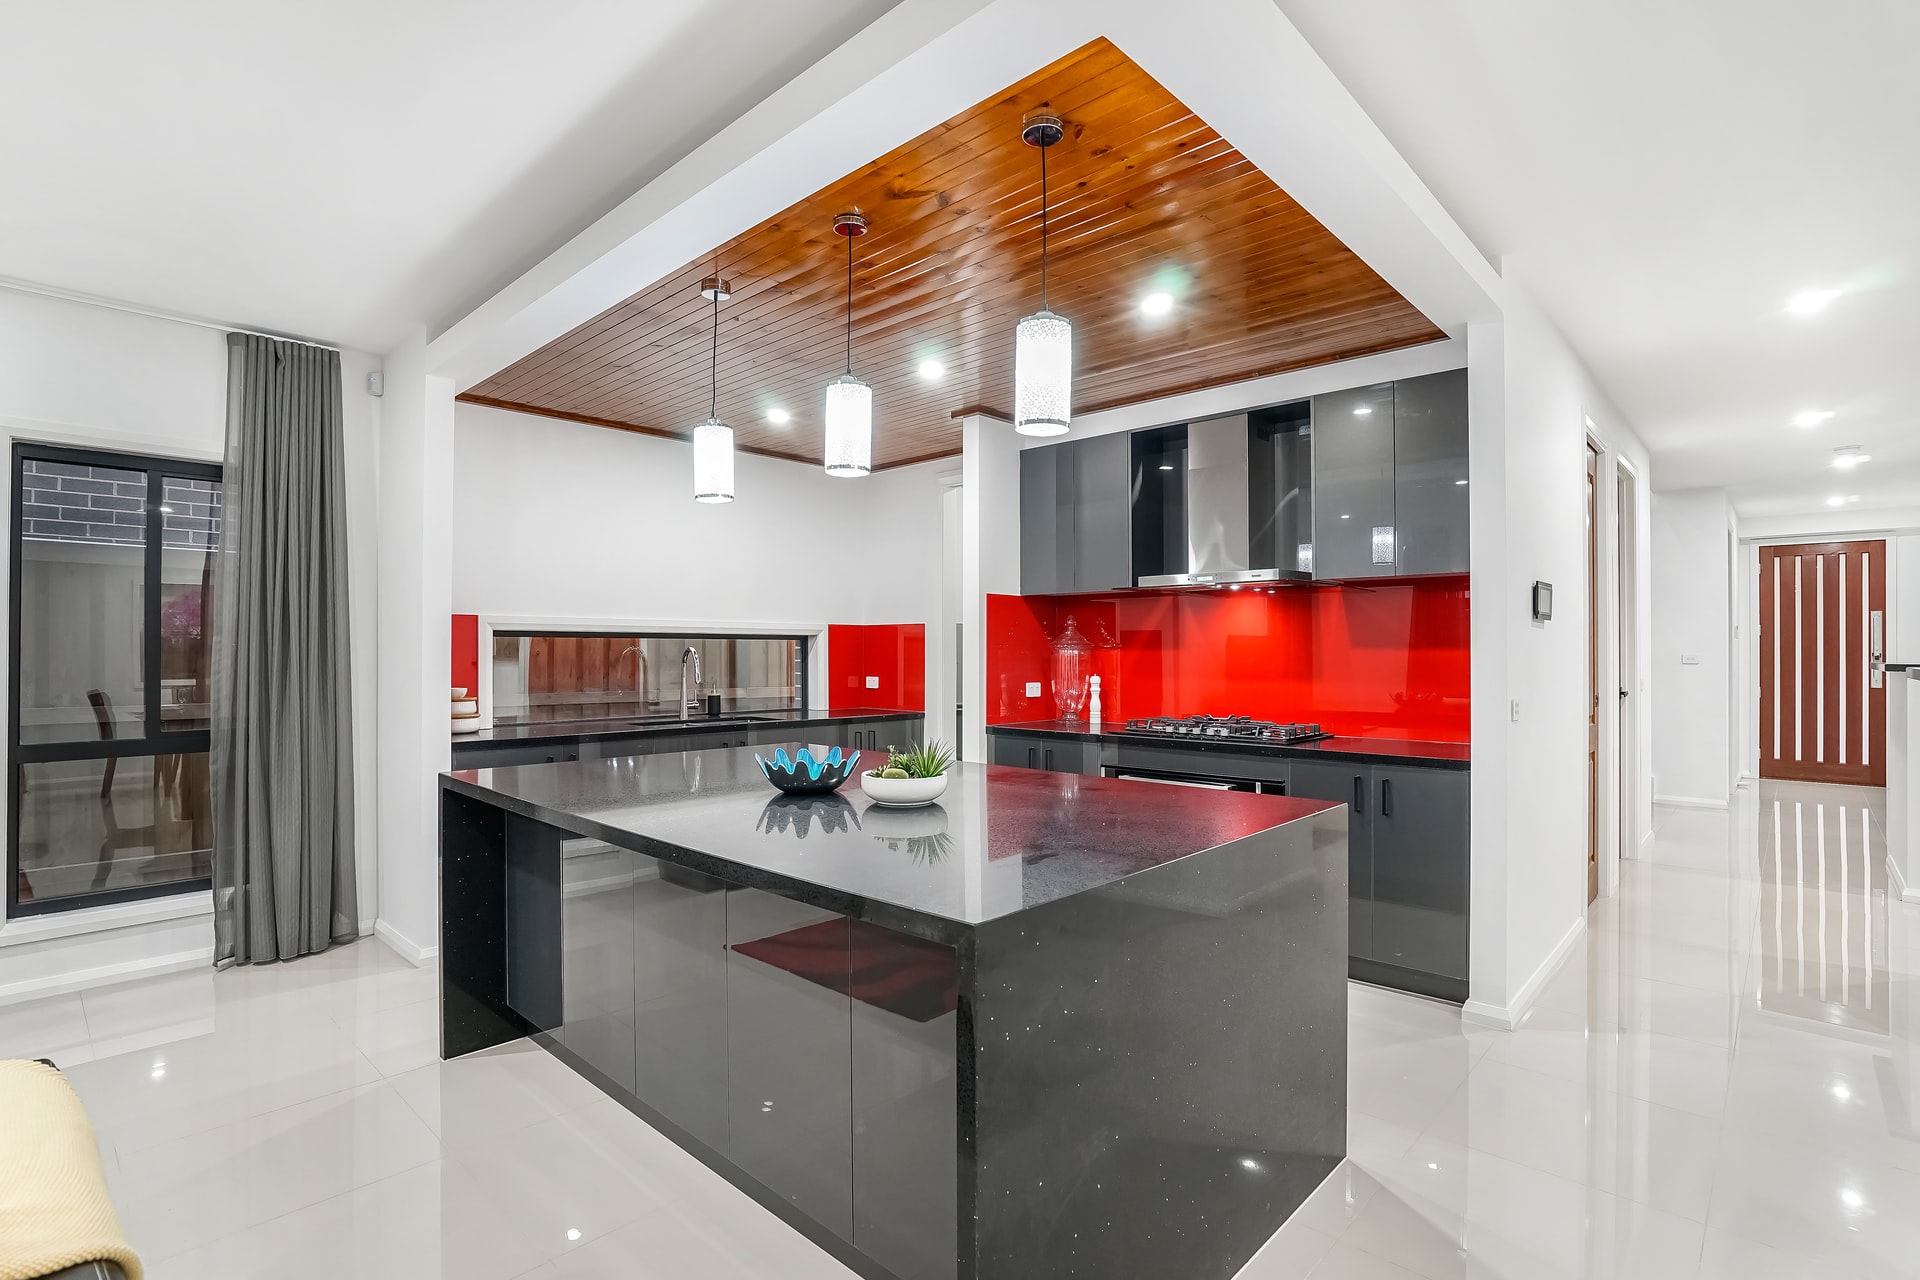 What Is High Gloss Cabinetry?